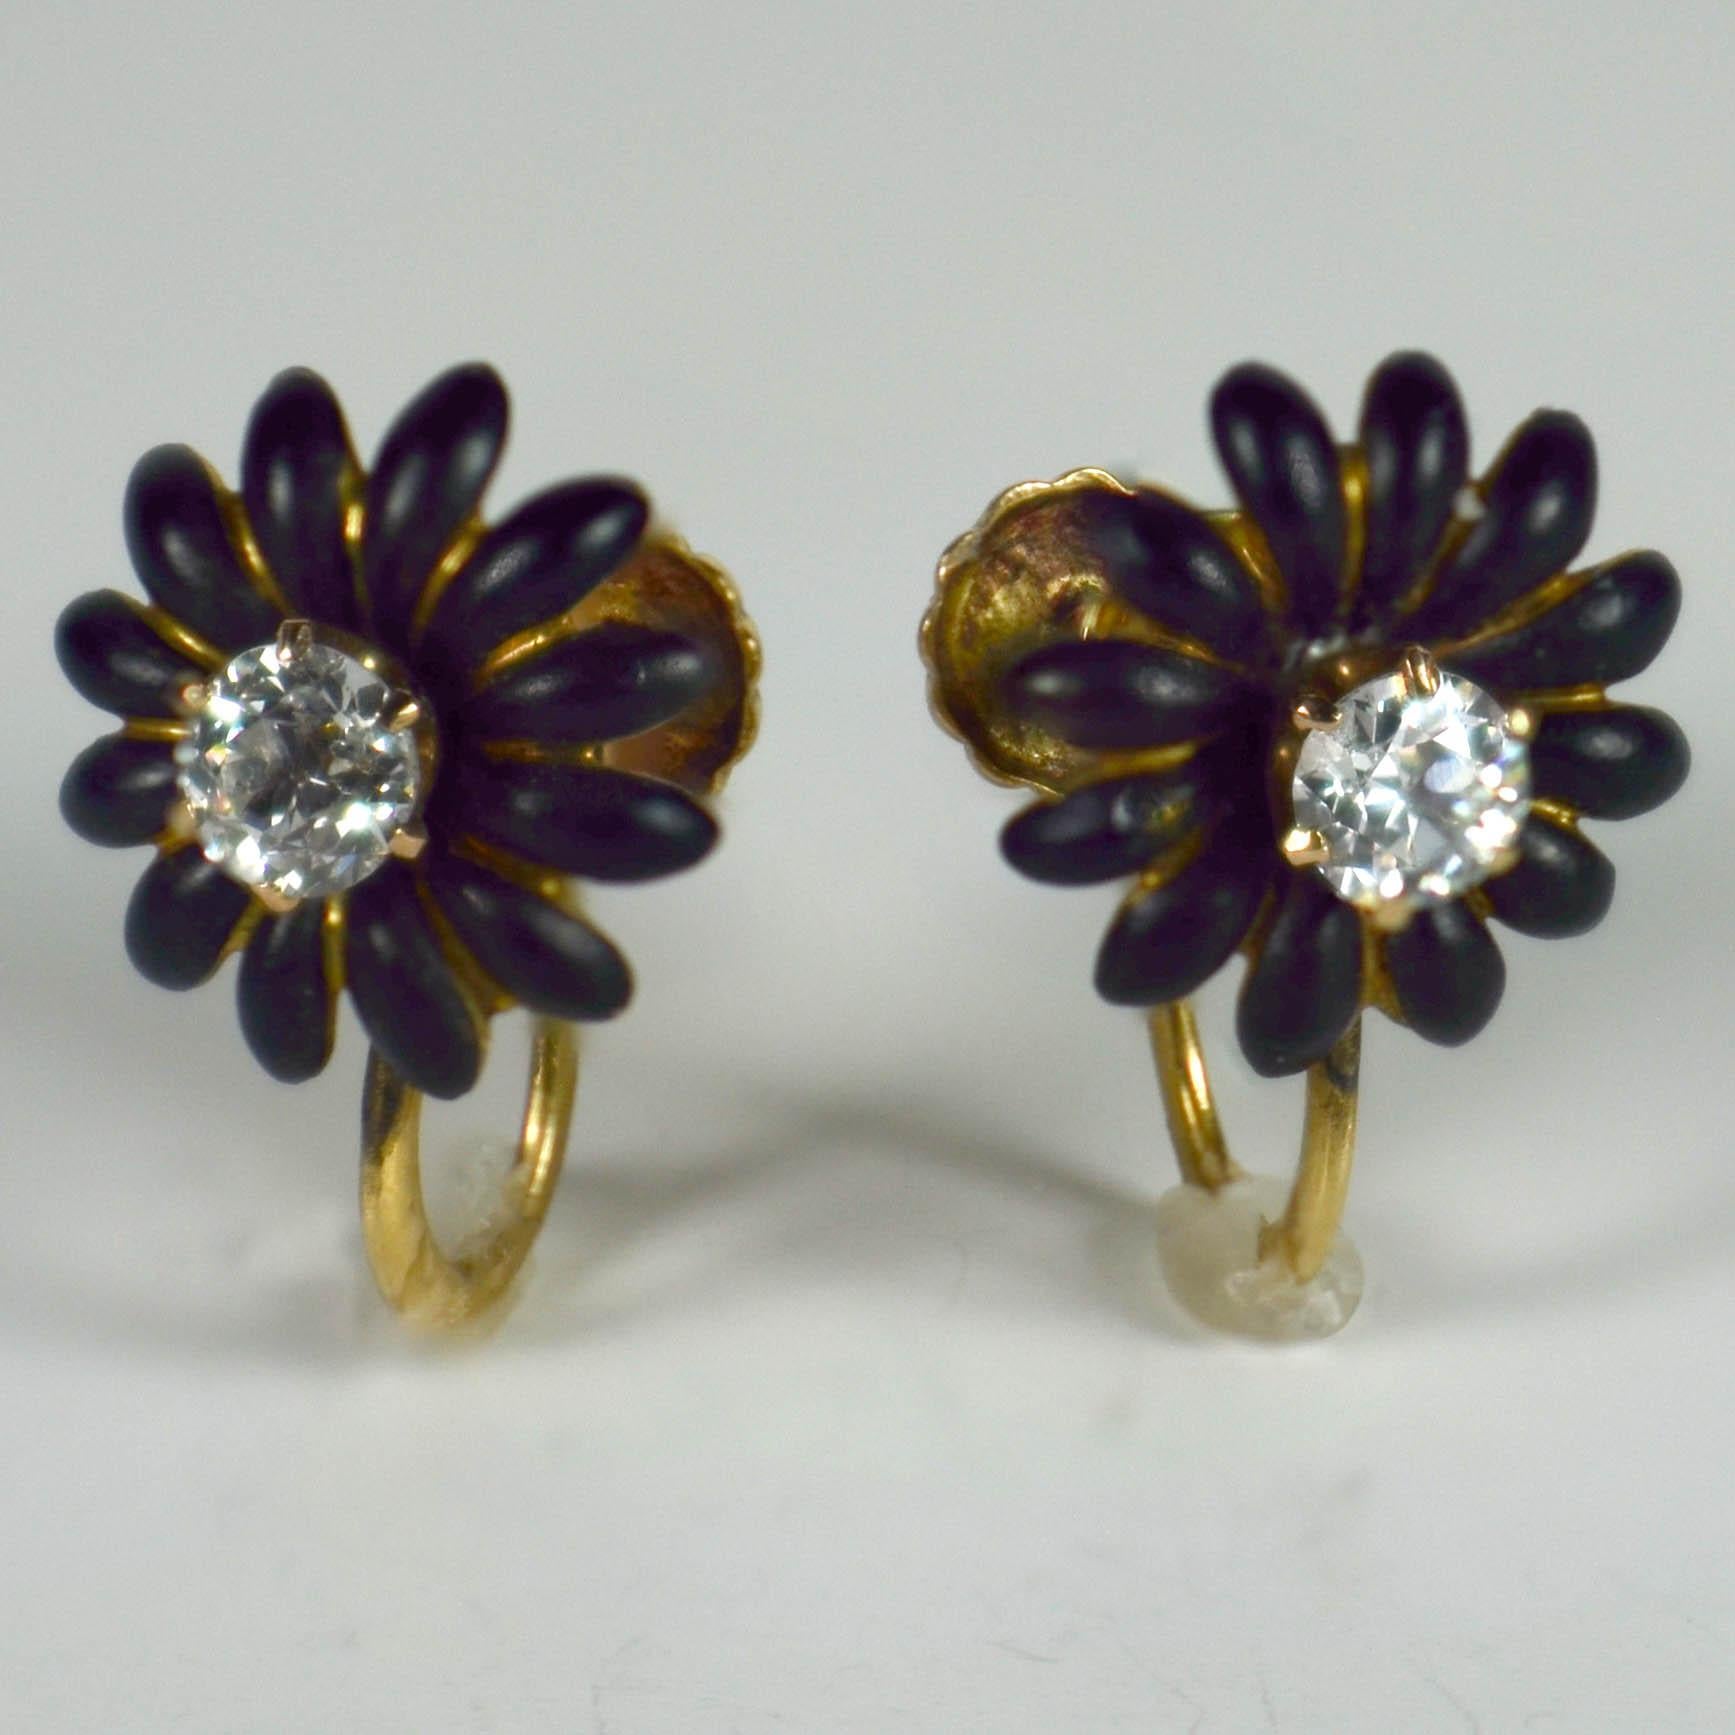 A pair of 10 karat yellow gold screw-back earrings designed as flowers, each with 12 black enamel petals surrounding an Old European Cut white diamond centre.

Marked 10KT.
Total approximate diamond weight 0.80 carats.